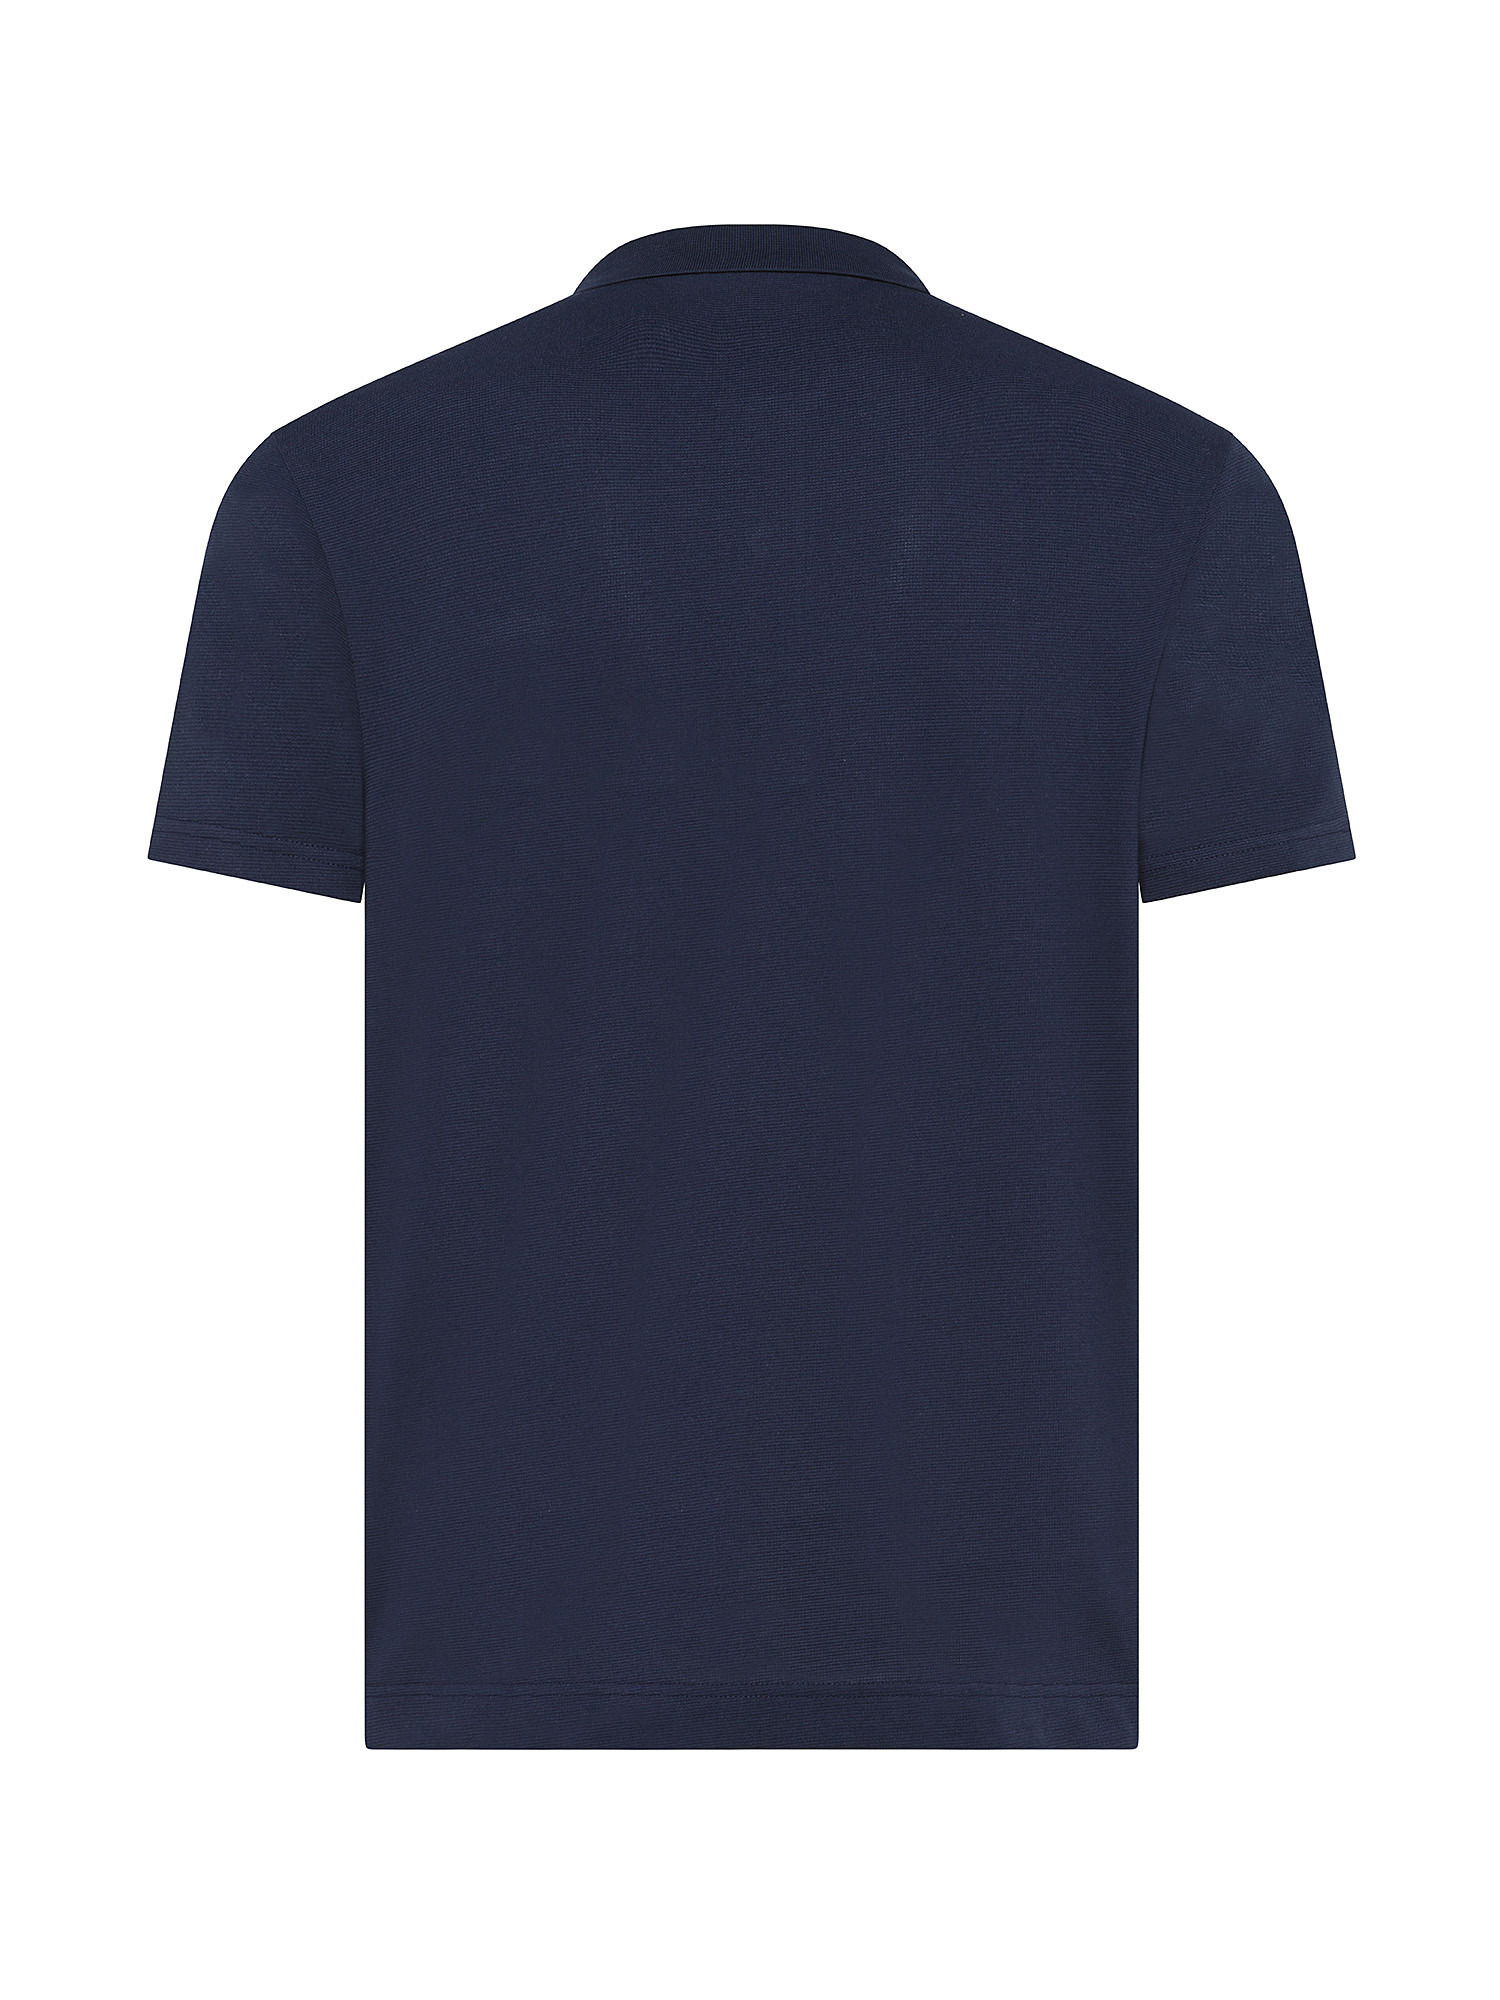 Lacoste - Polo stretch regular fit, Blu scuro, large image number 1